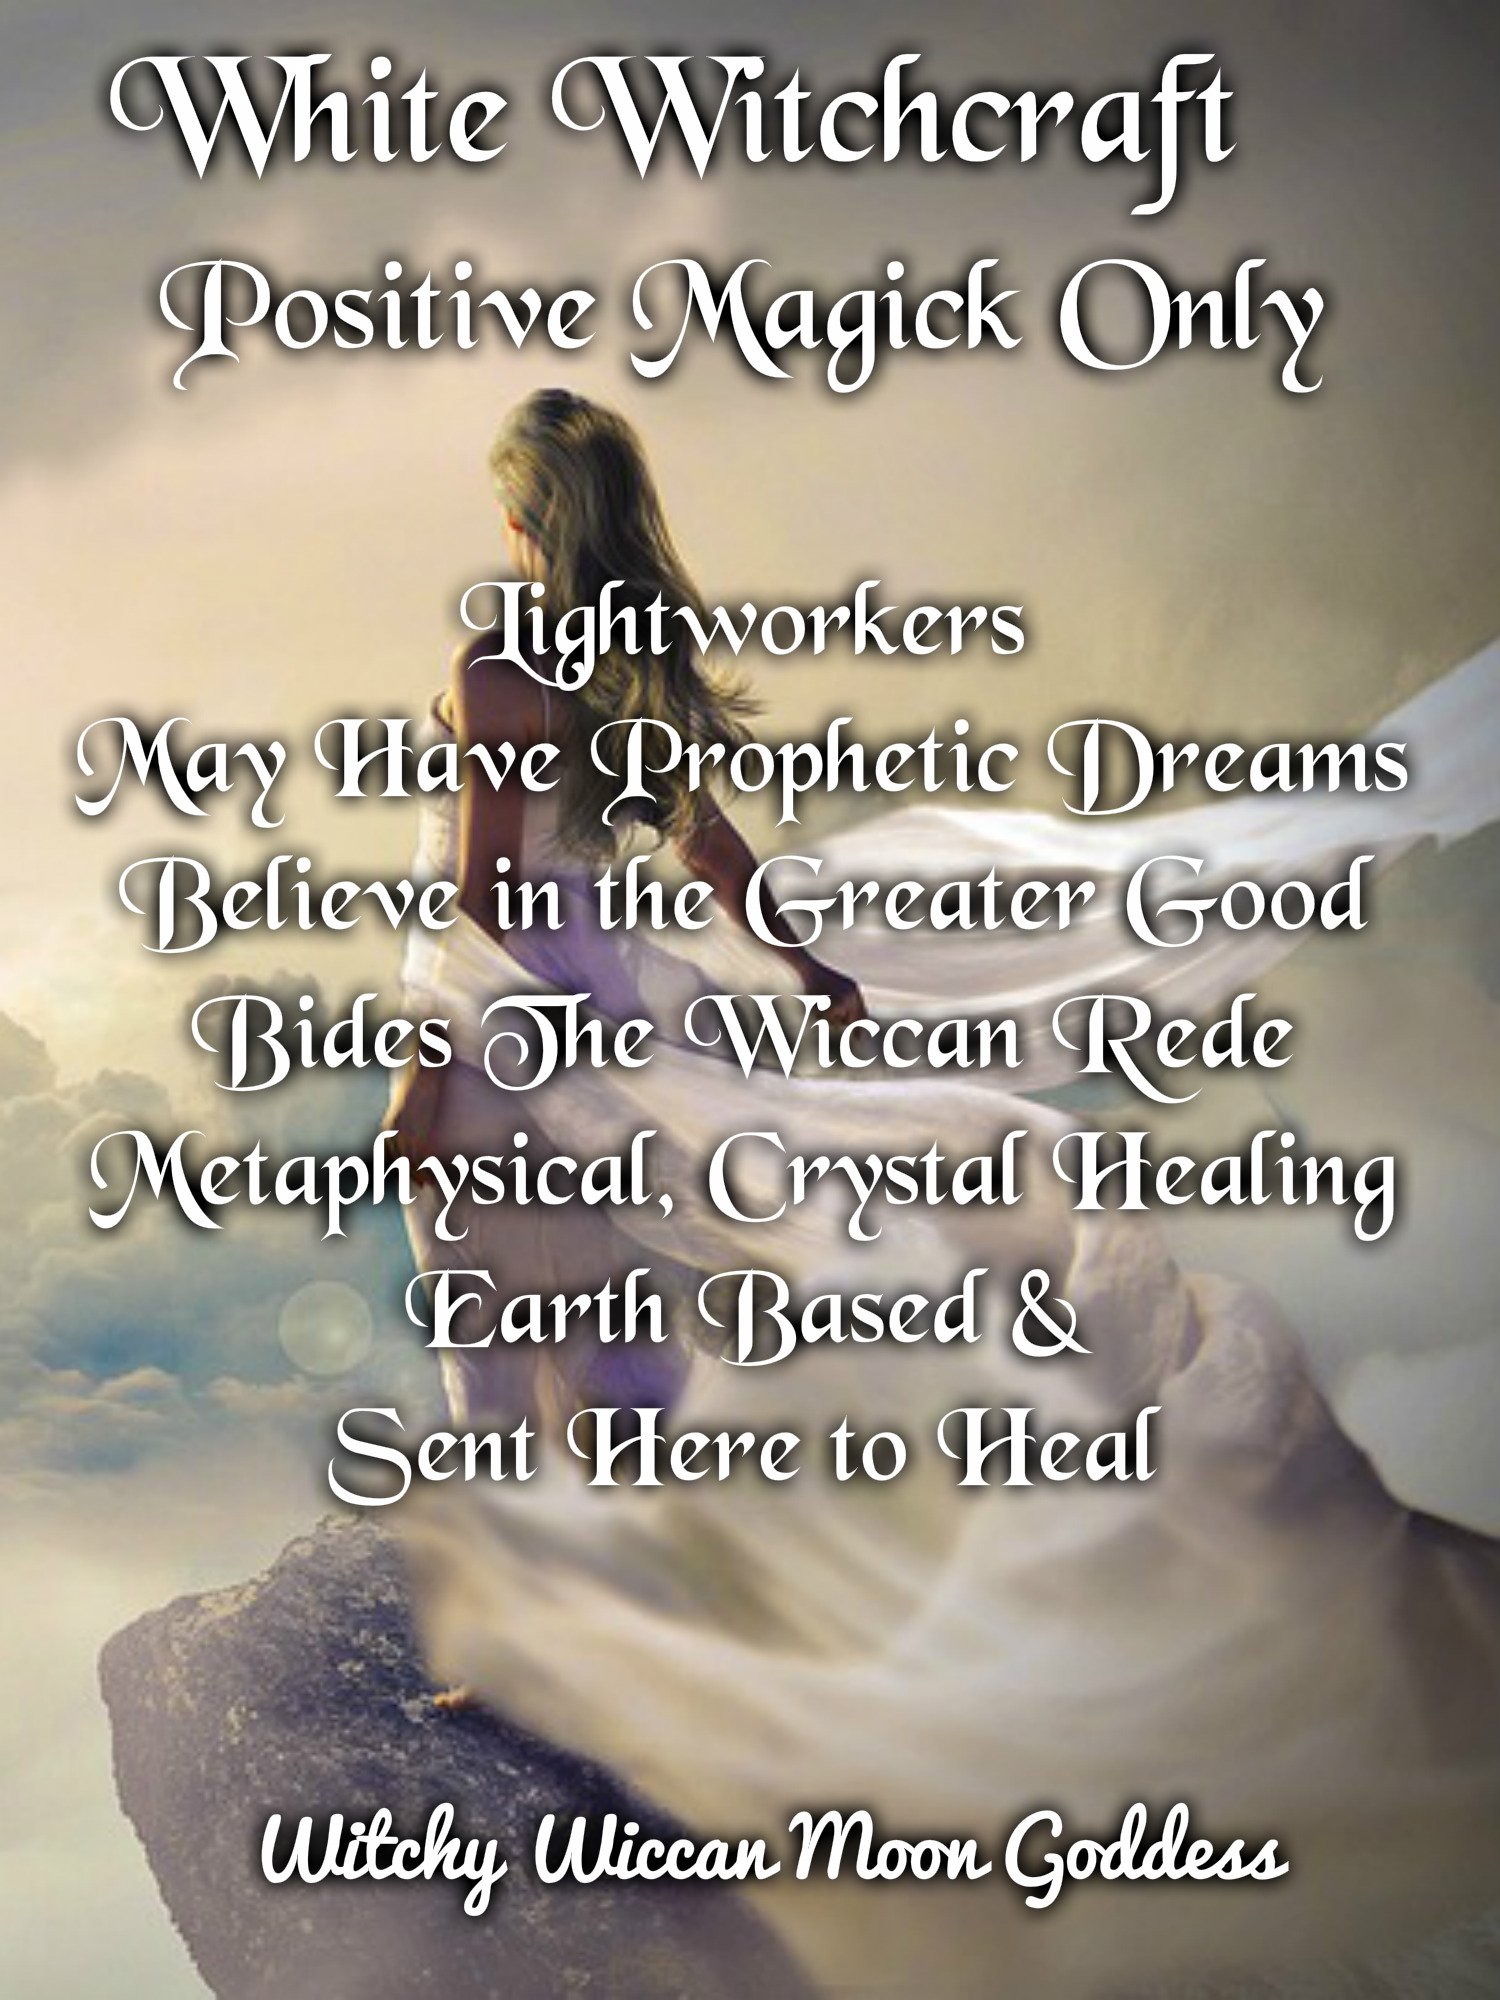 White Witchcraft: Positive Magick Only. Lightworkers, May have prophetic dreams, Believe in the greater good, Bides the Wiccan Rede, Metaphysical Crystal Healing, Earth Based, Sent Here to Heal.